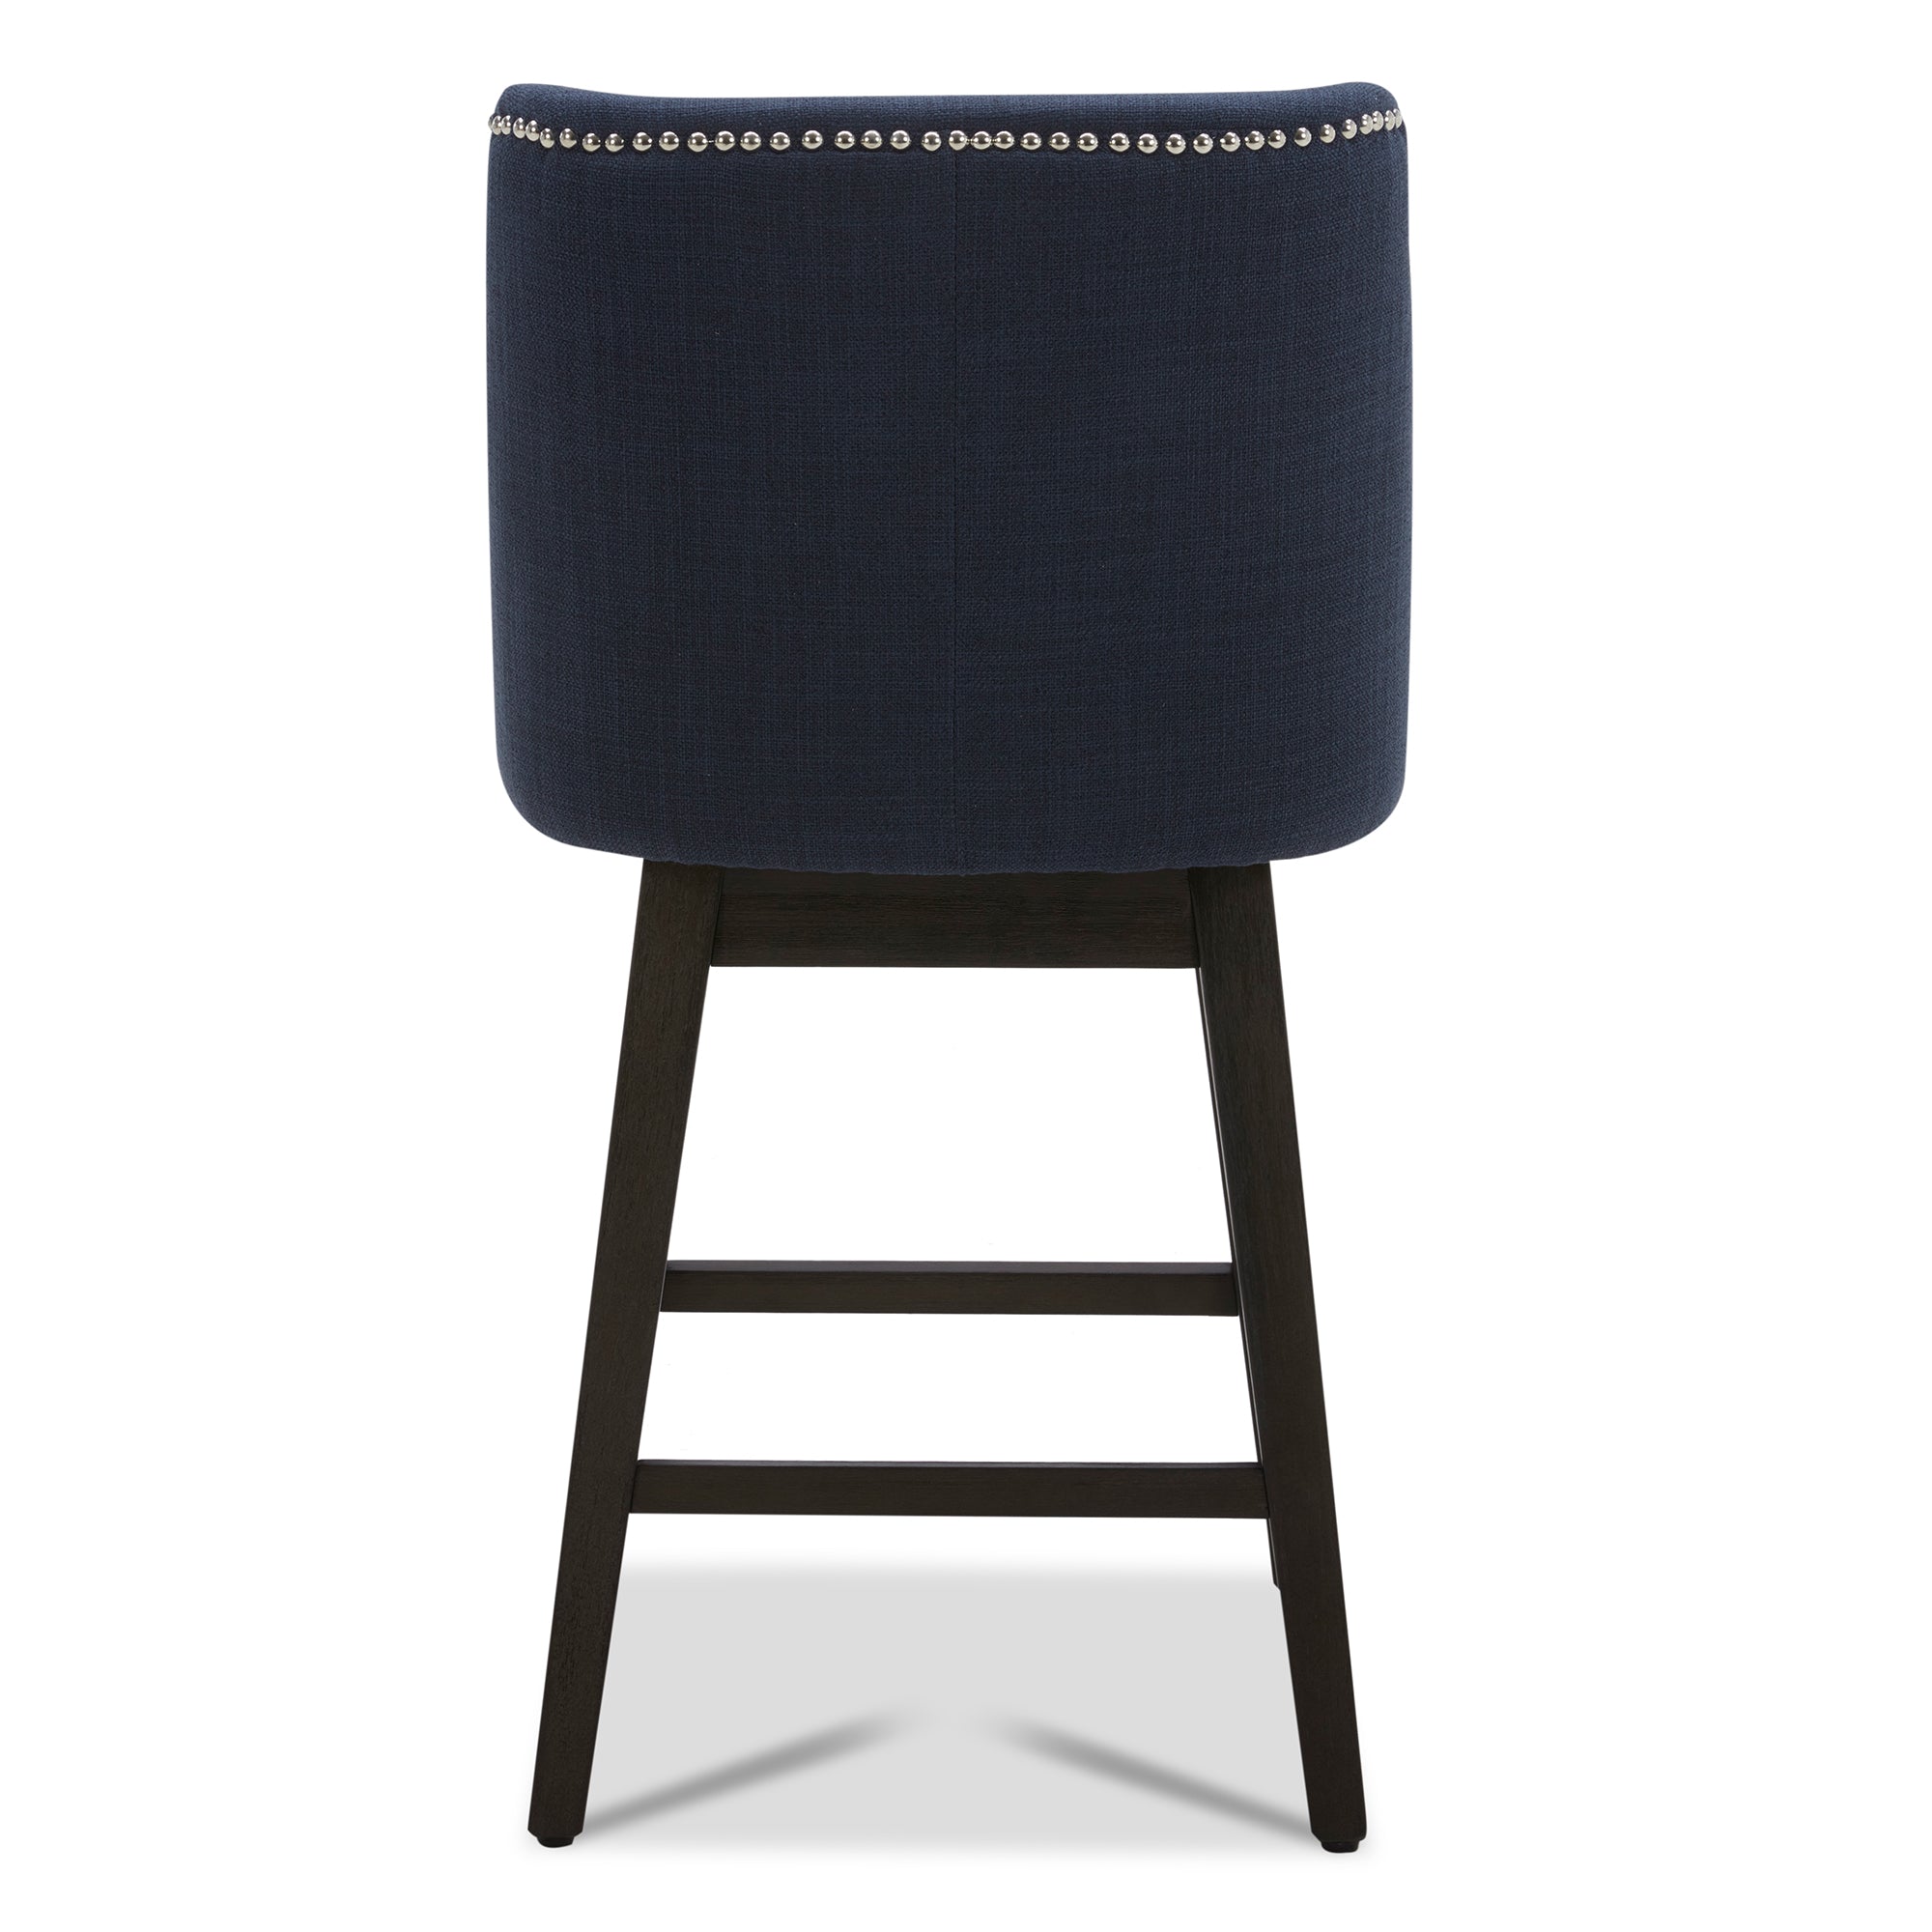 CHITA LIVING-Asher Swivel Counter Stool with Nailhead Trim( Set of 2)-Counter Stools-Performance Fabric-Insignia blue-